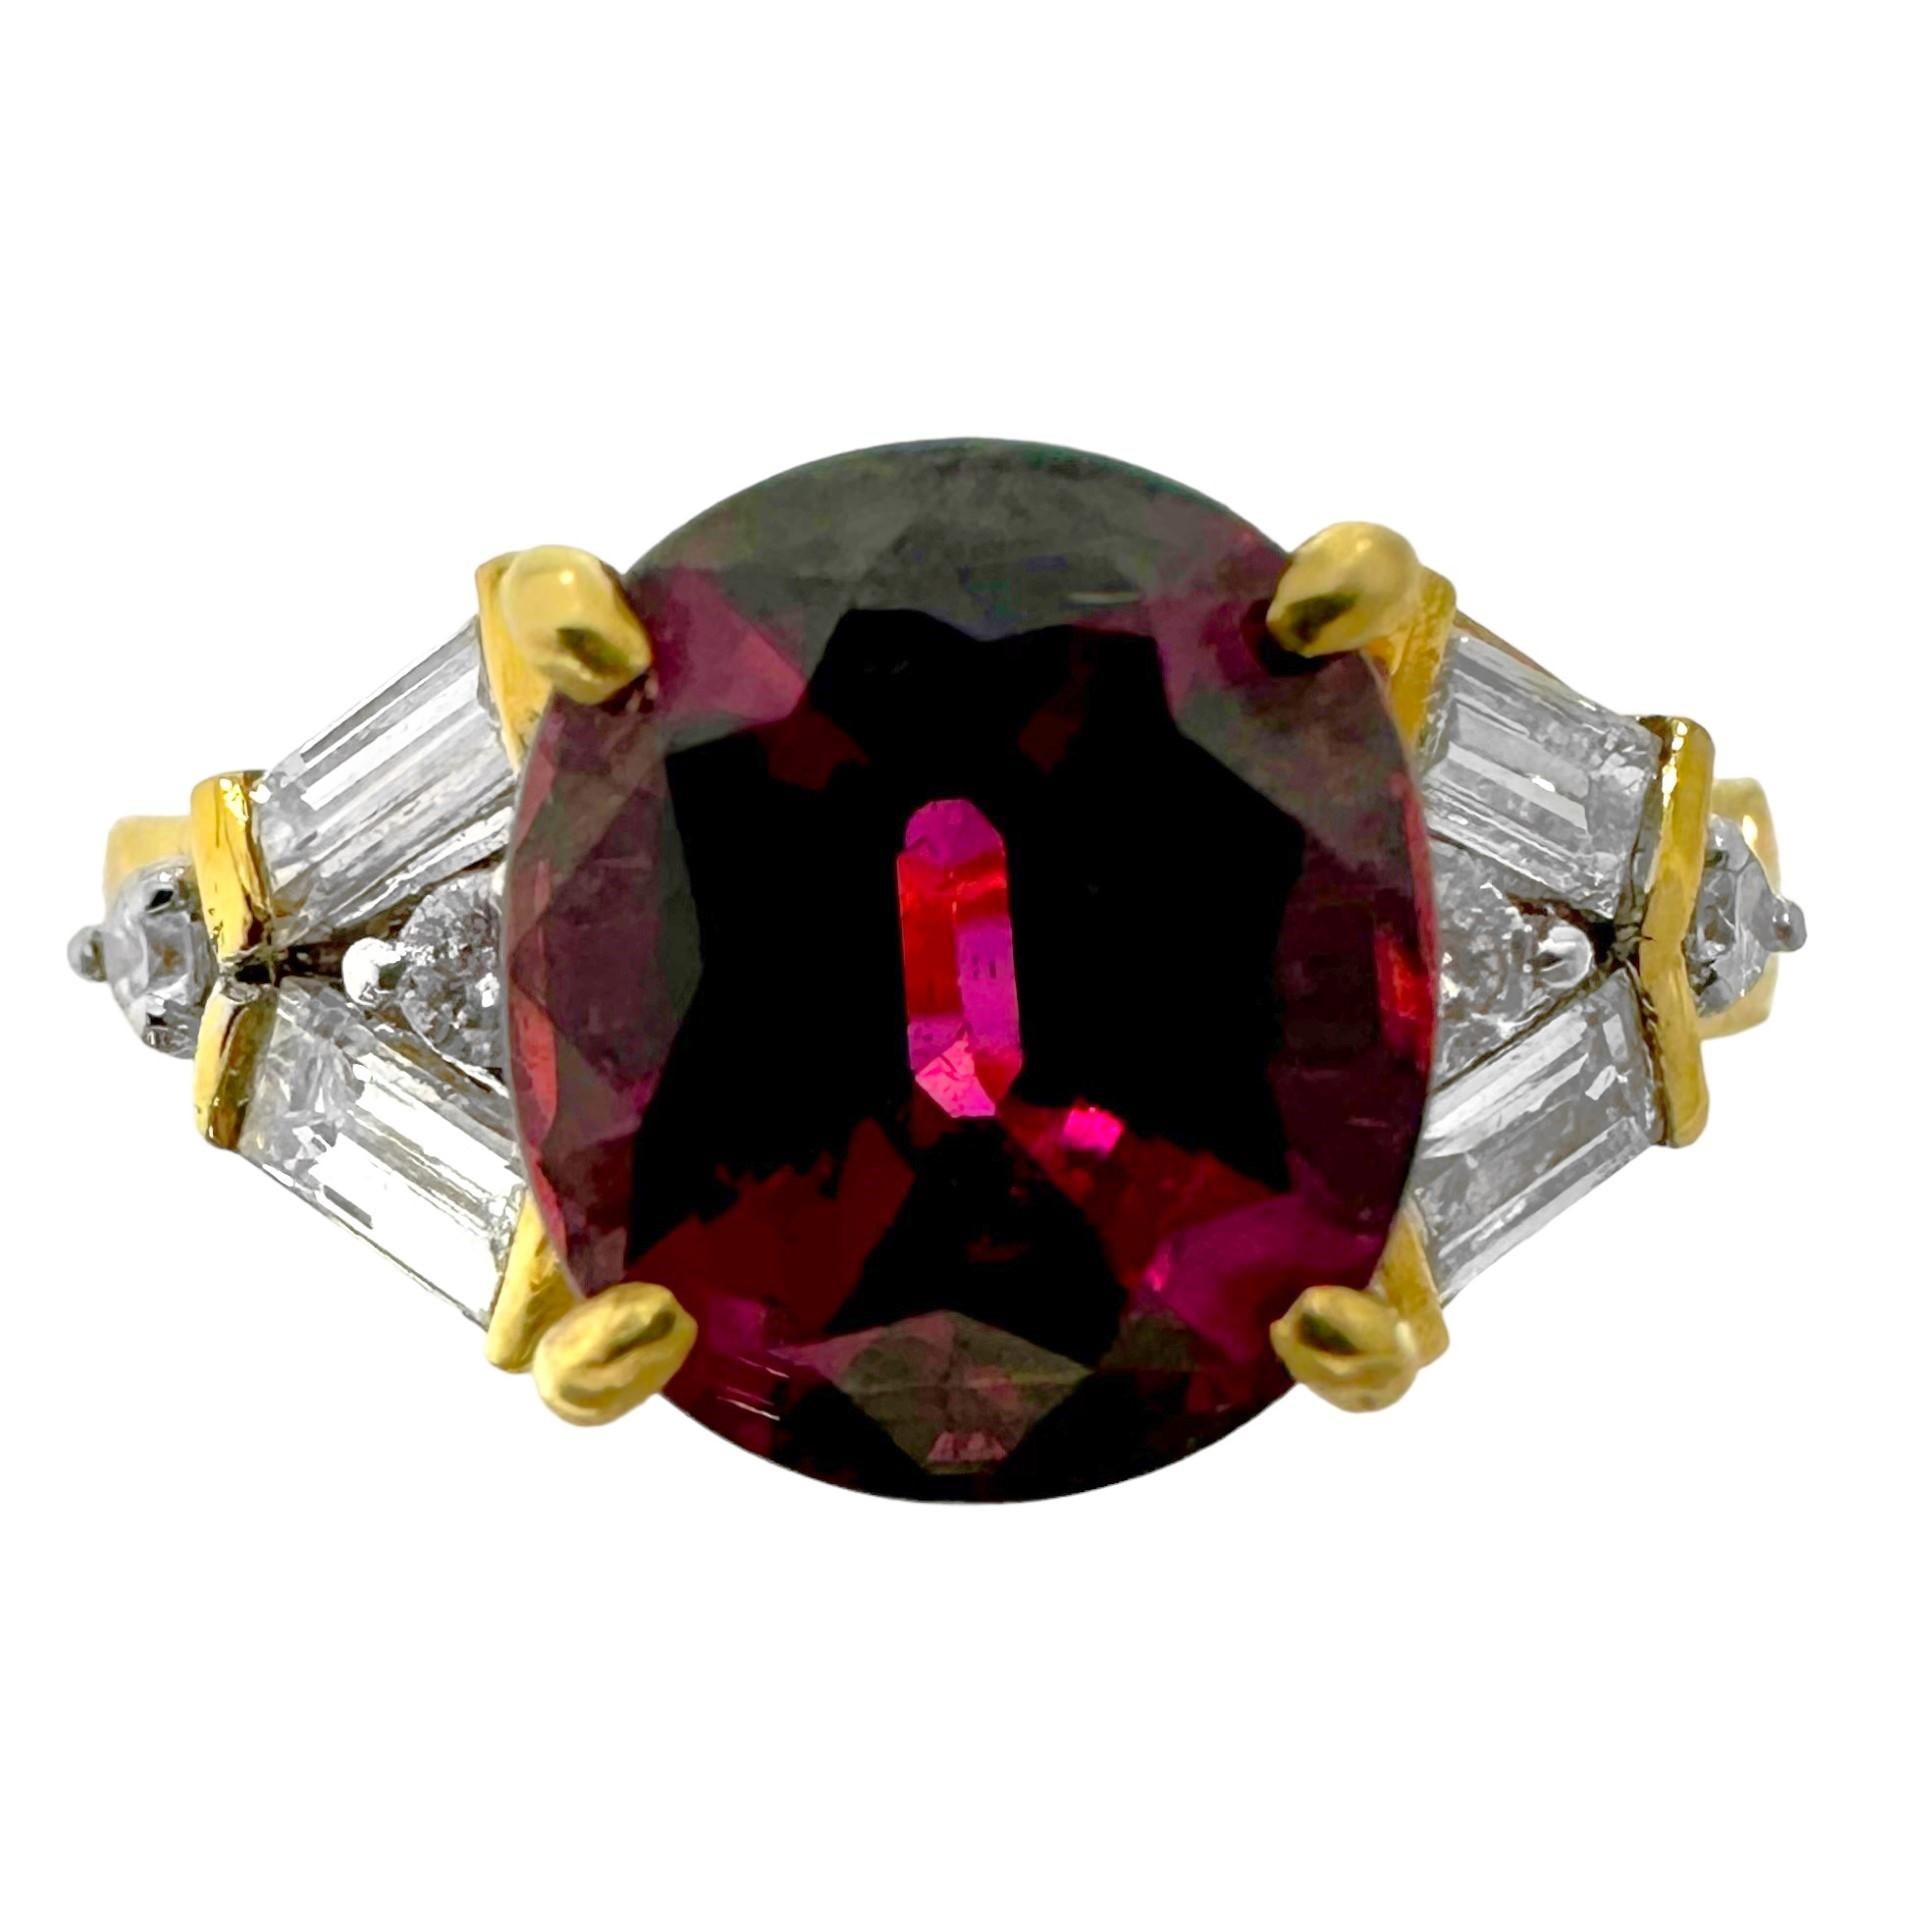 This traditional 18k yellow gold solitaire ring is a bit out of the ordinary. A sumptuous Rhodolite Garnet, exhibiting all the colors of fine red wine, is set at the center and is flanked by a total of four straight baguette and four brilliant cut